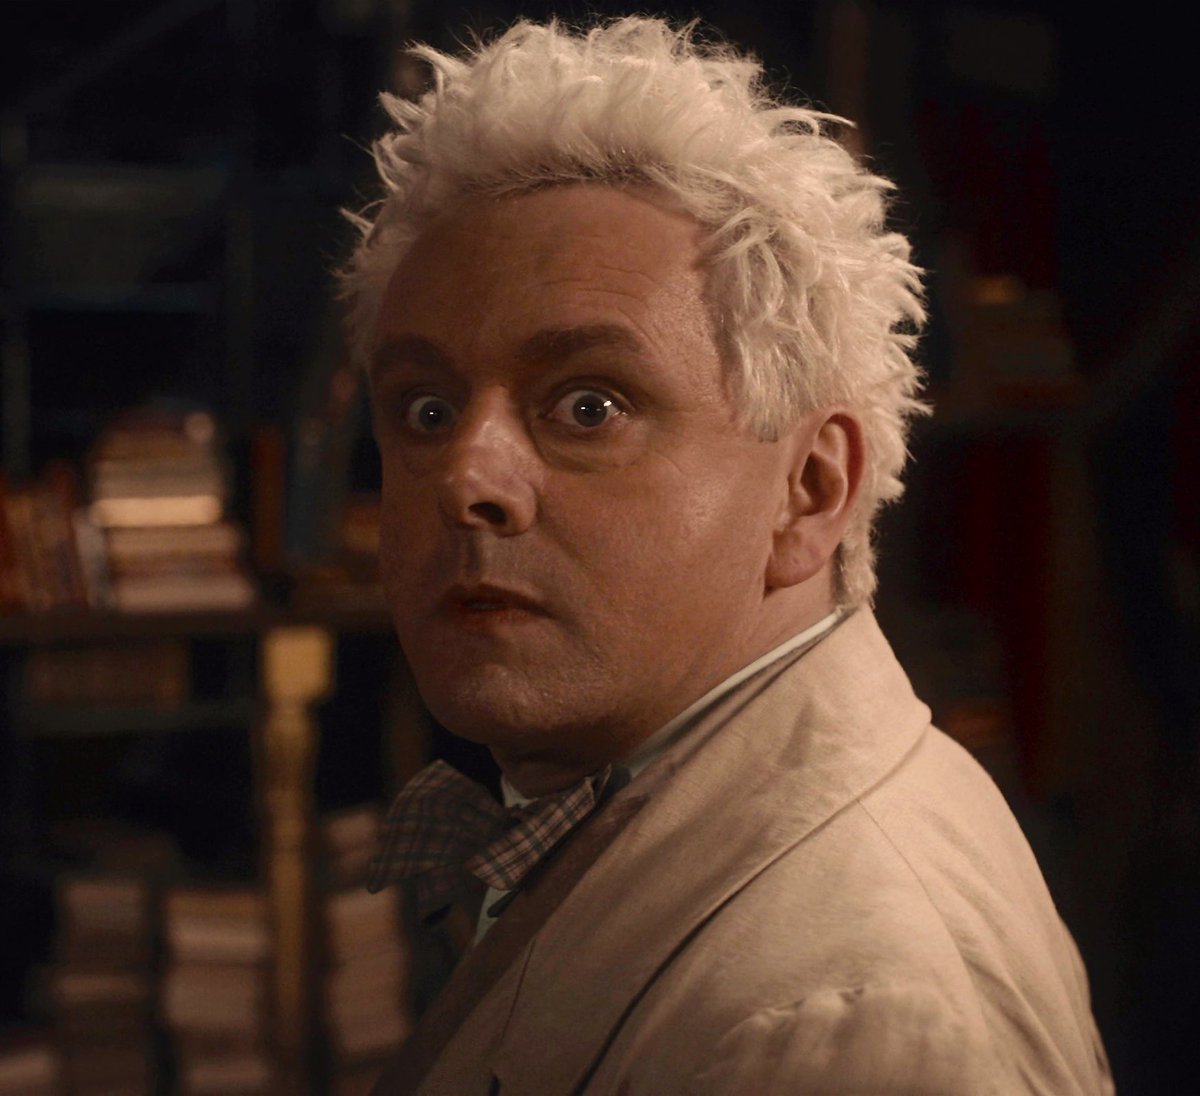 I know we're all saying Aziraphale have soft curls and all but it looks SO ROUGH and SPIKY to me 😂
So he's a tiny hedgehog now.
#GoodOmens 